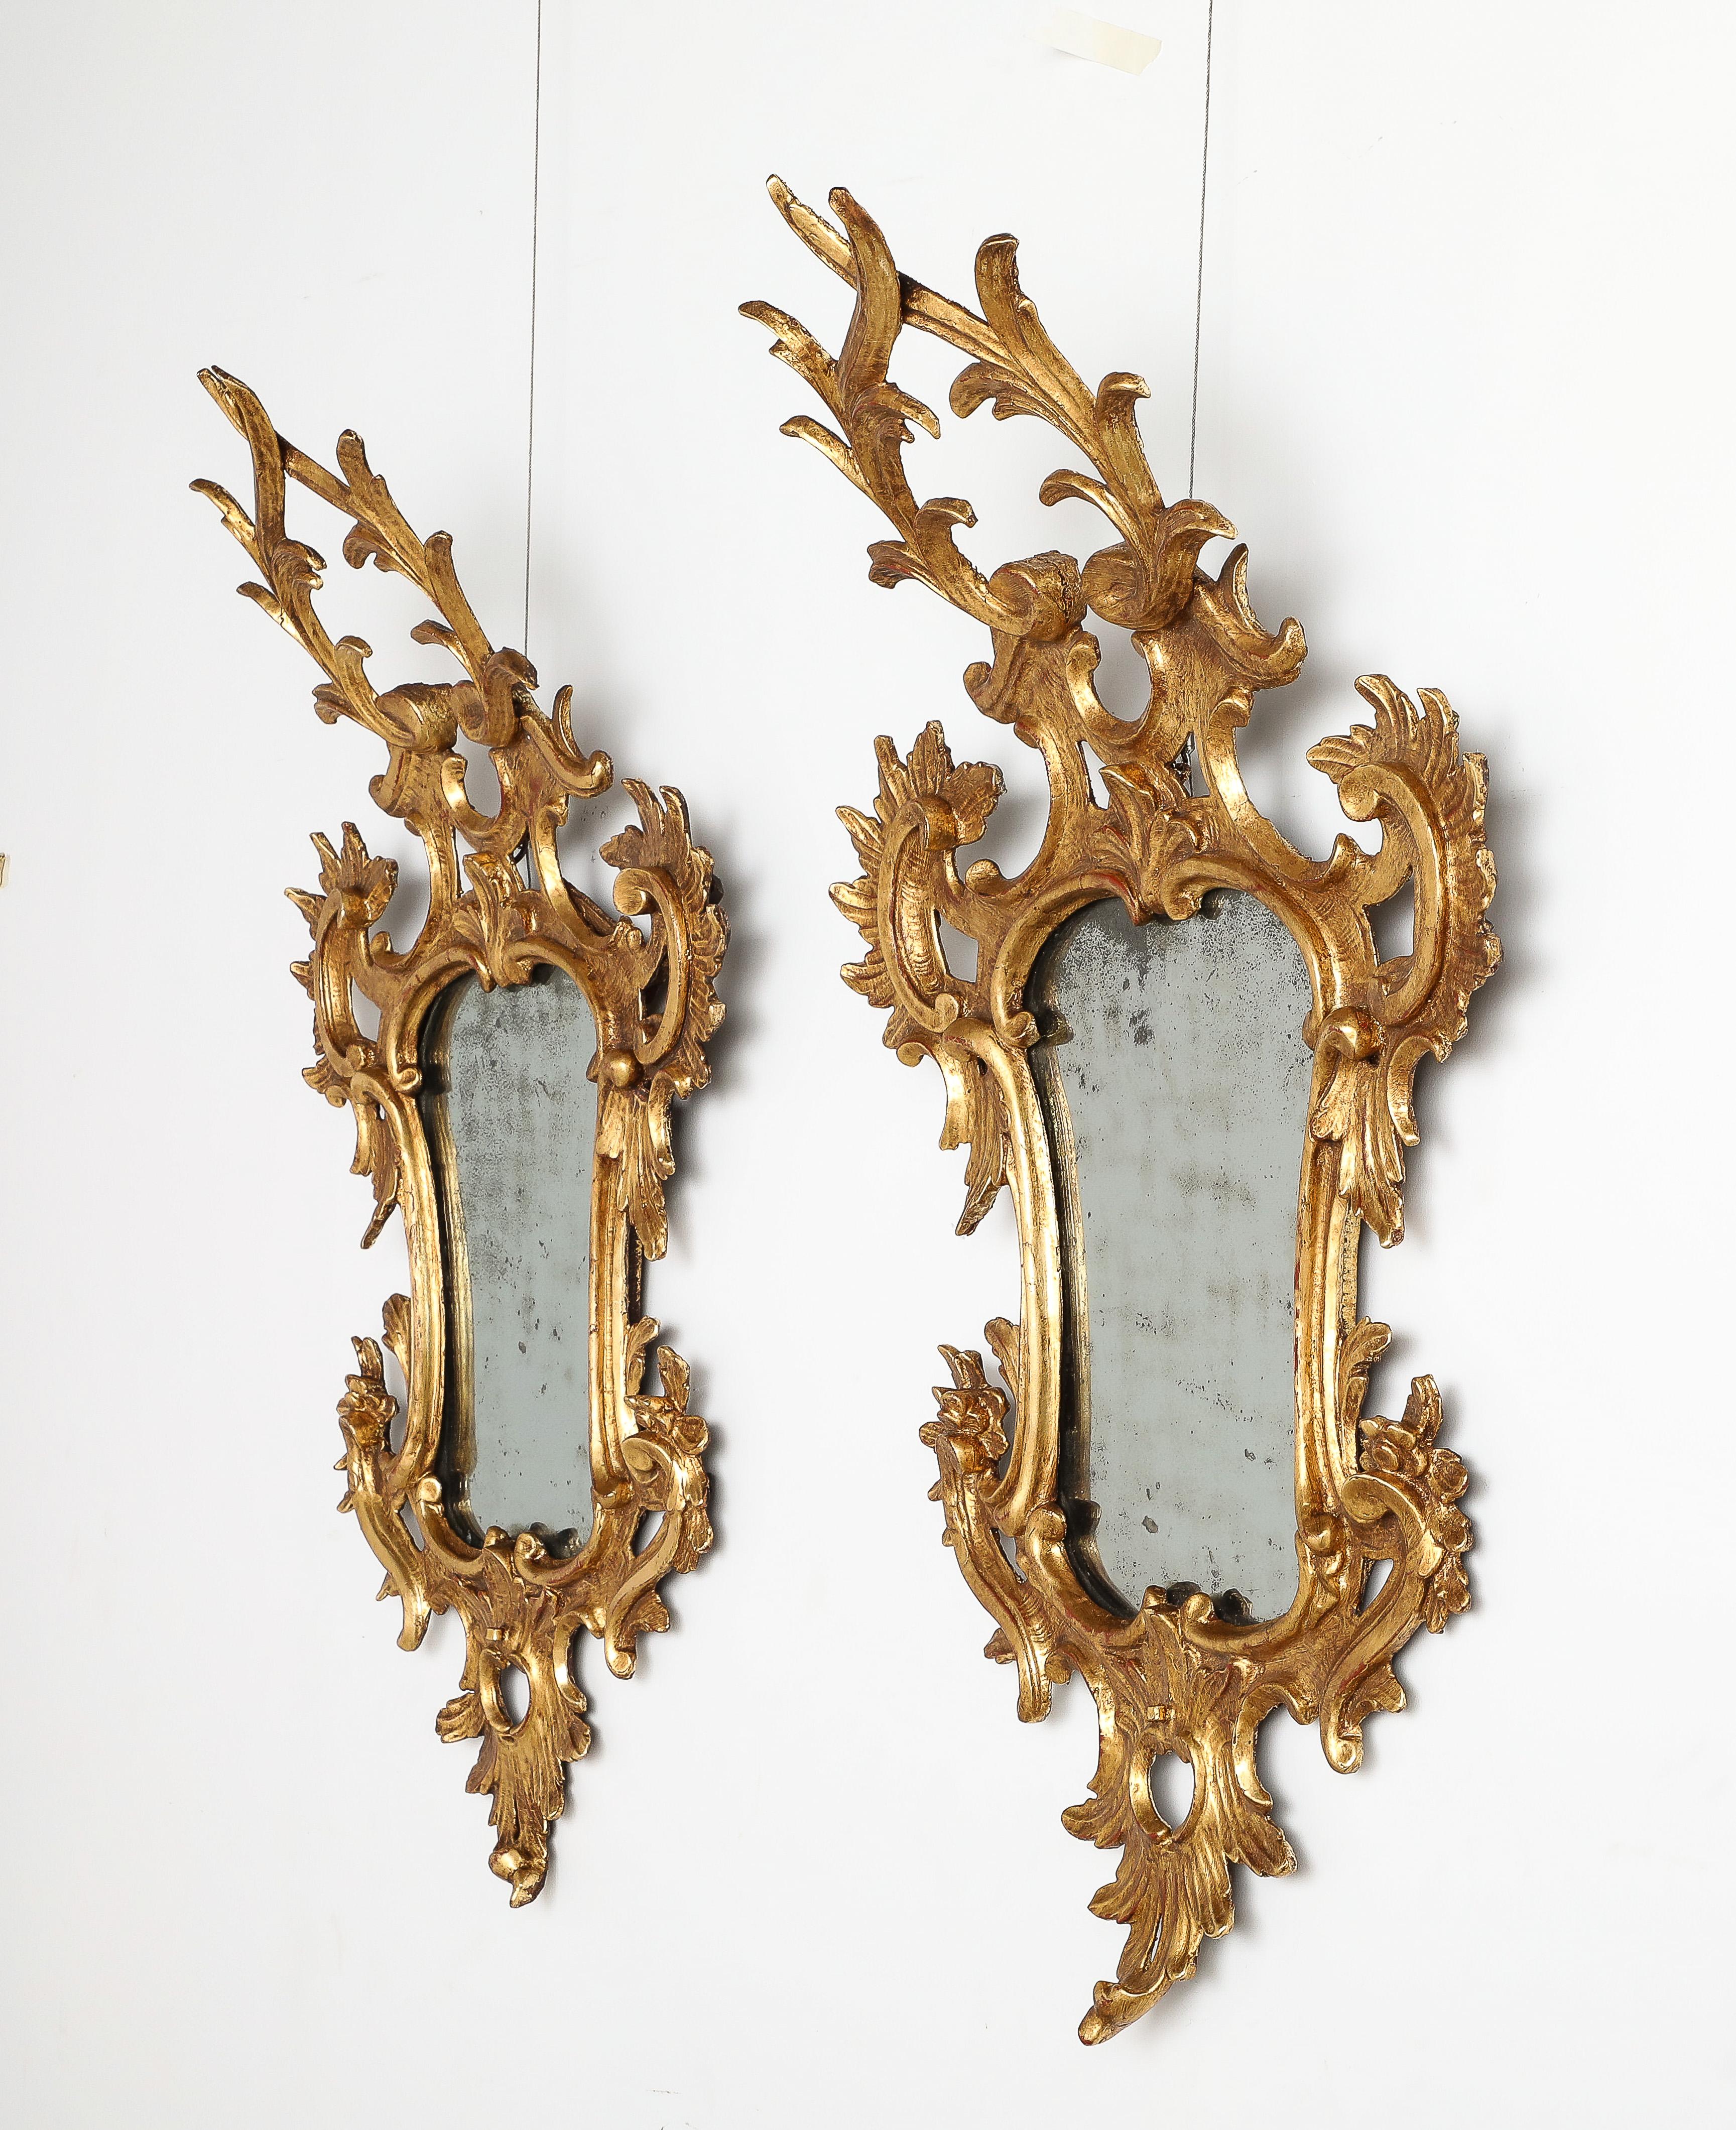 Hand-Carved Pair of Italian Eighteenth Century Rococo Carved and Gilded Wood Mirrors For Sale